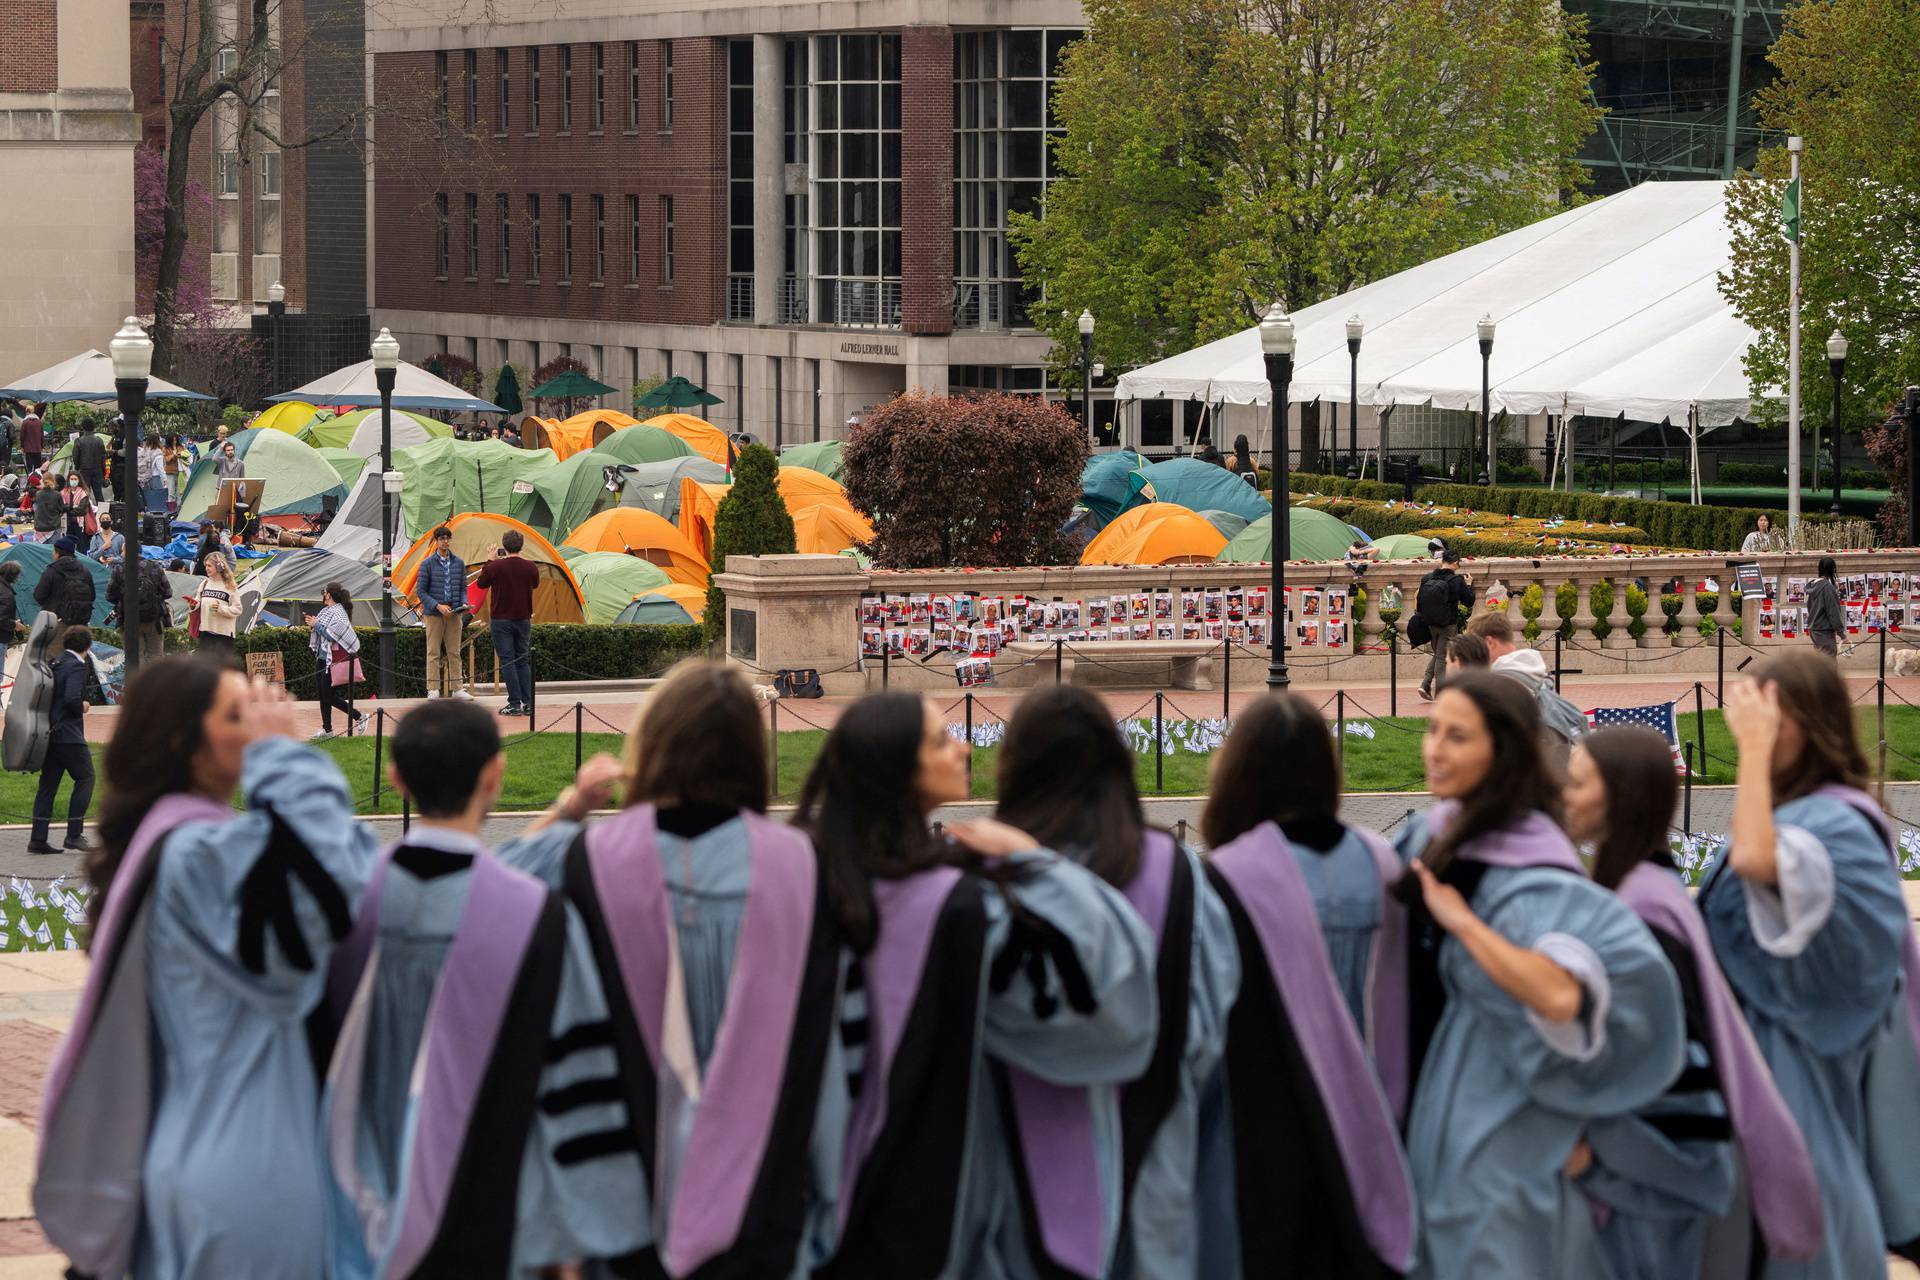 Students wearing gowns stand as students continue to maintain a protest encampment on the main campus of Columbia University in support of Palestinians, in New York City